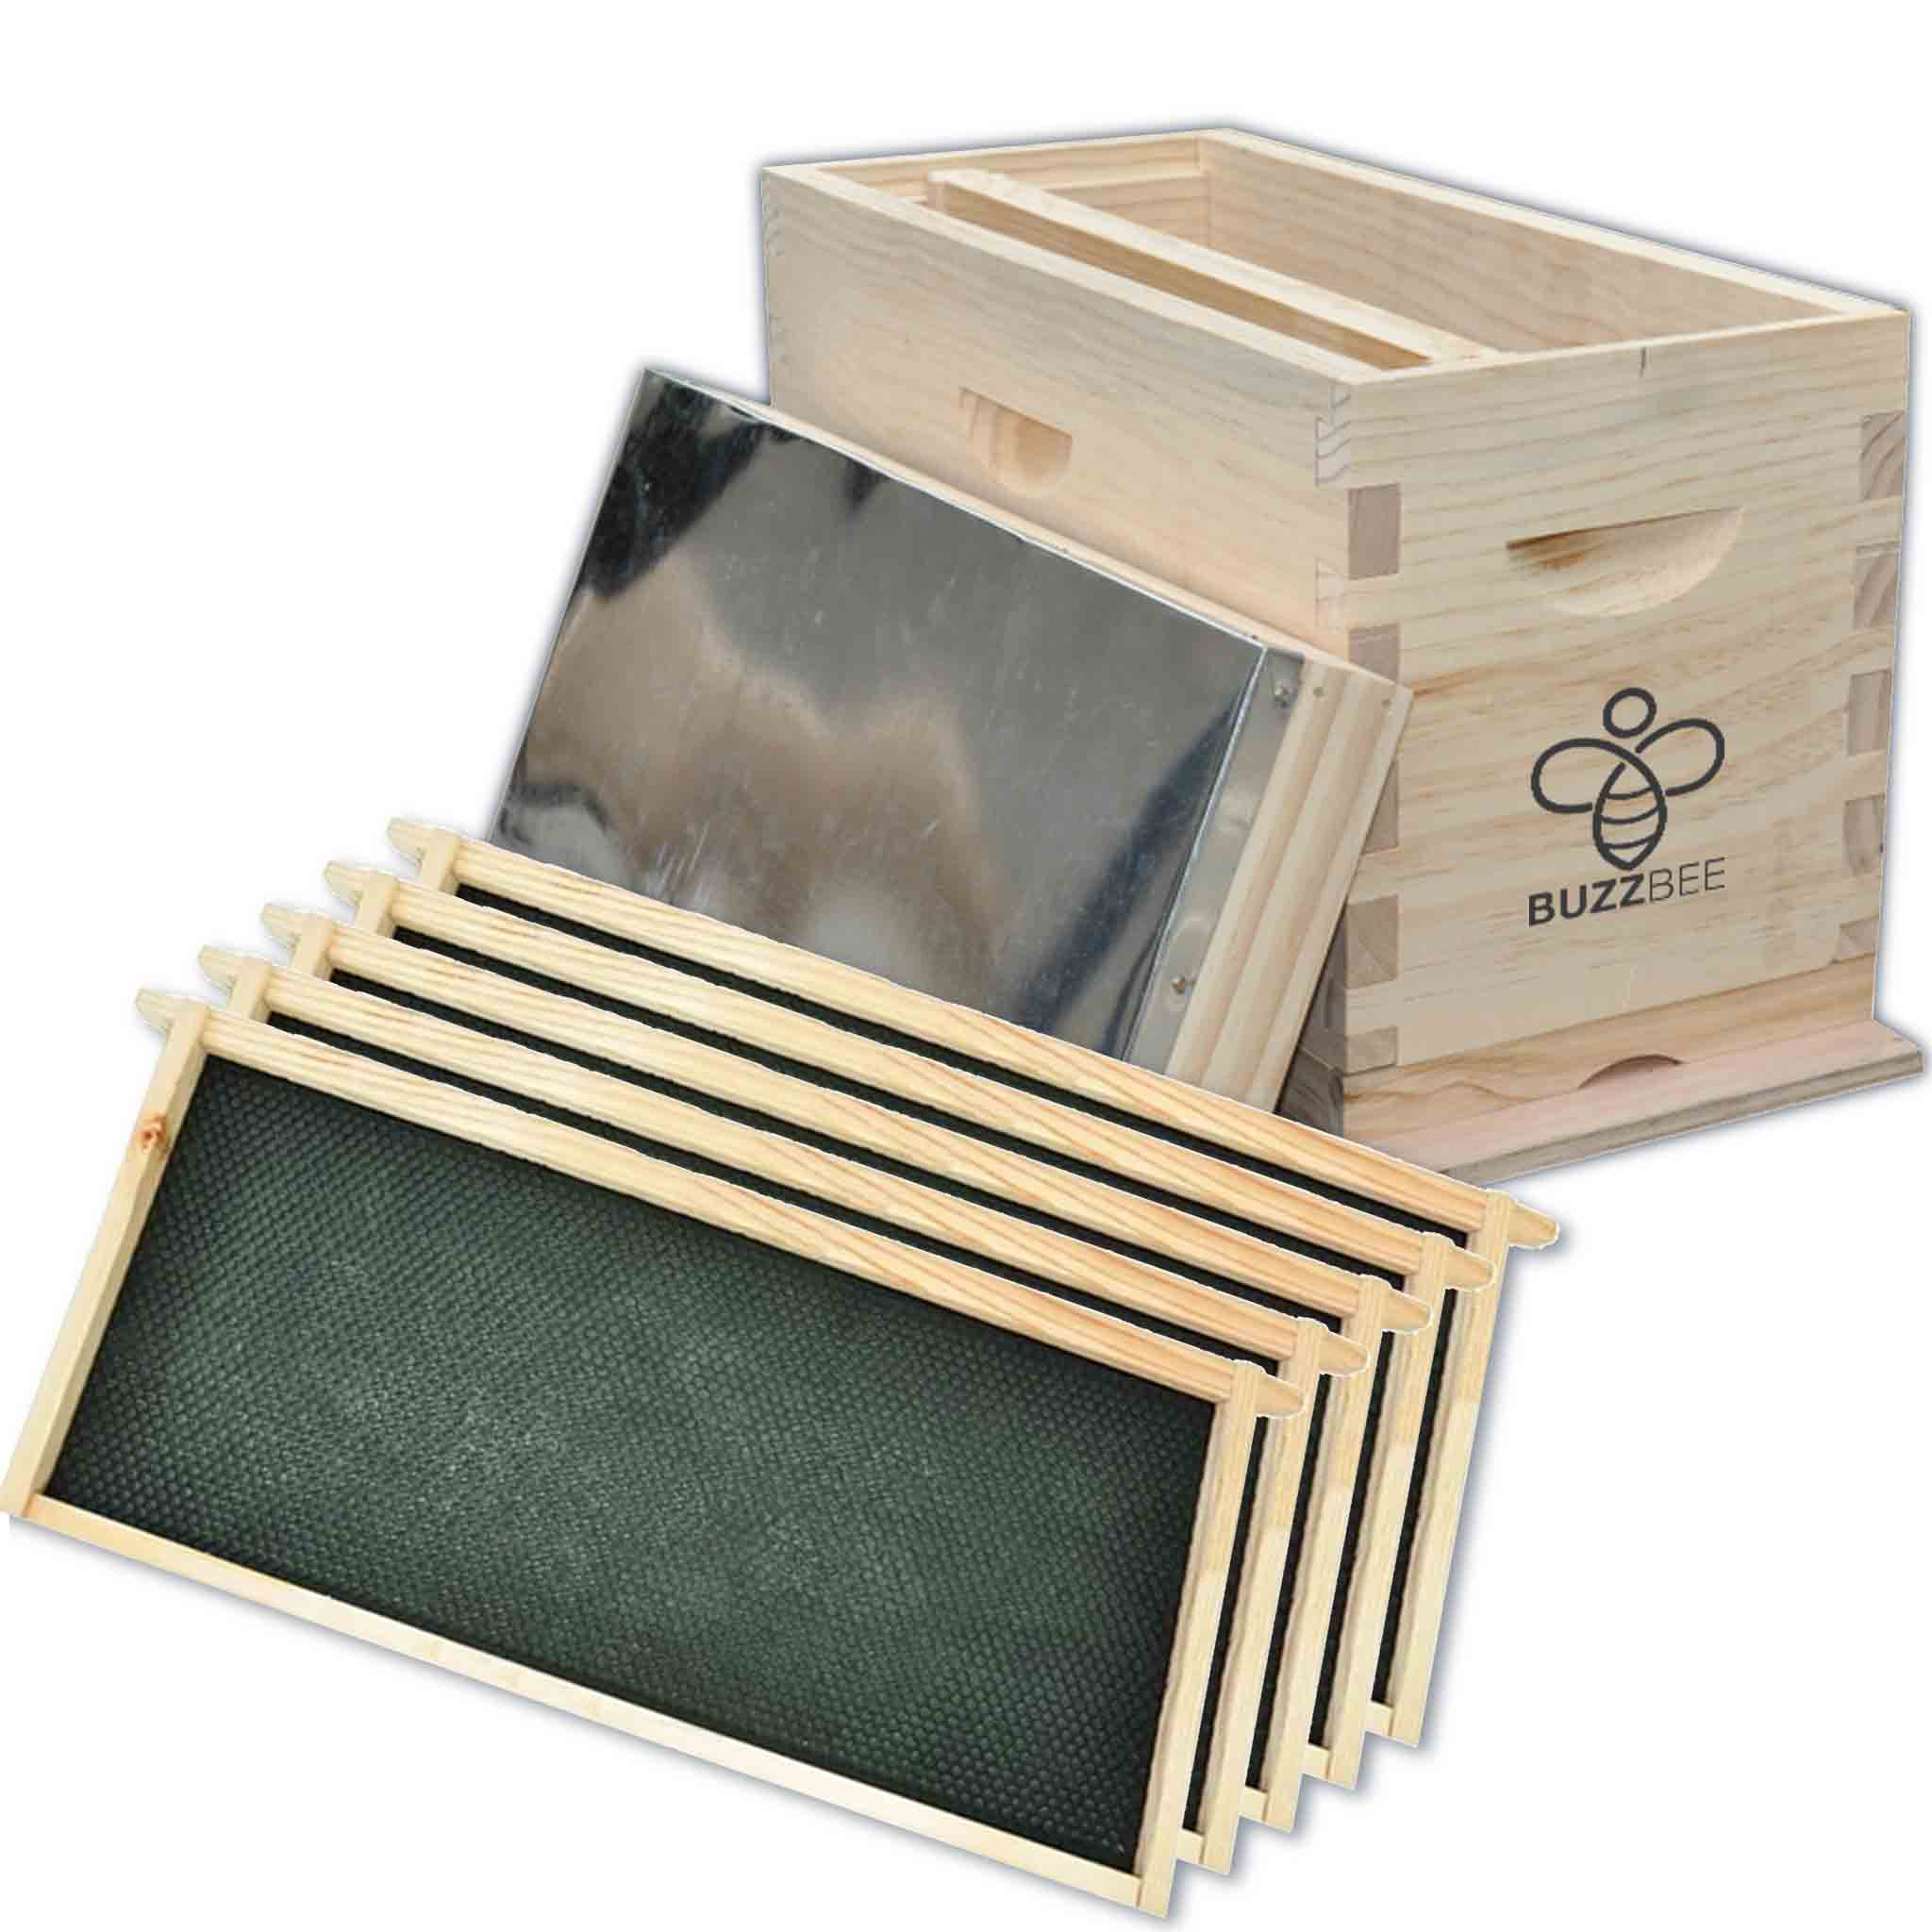 Buzzbee NUC Hive (5 Frames) - Hives collection by Buzzbee Beekeeping Supplies